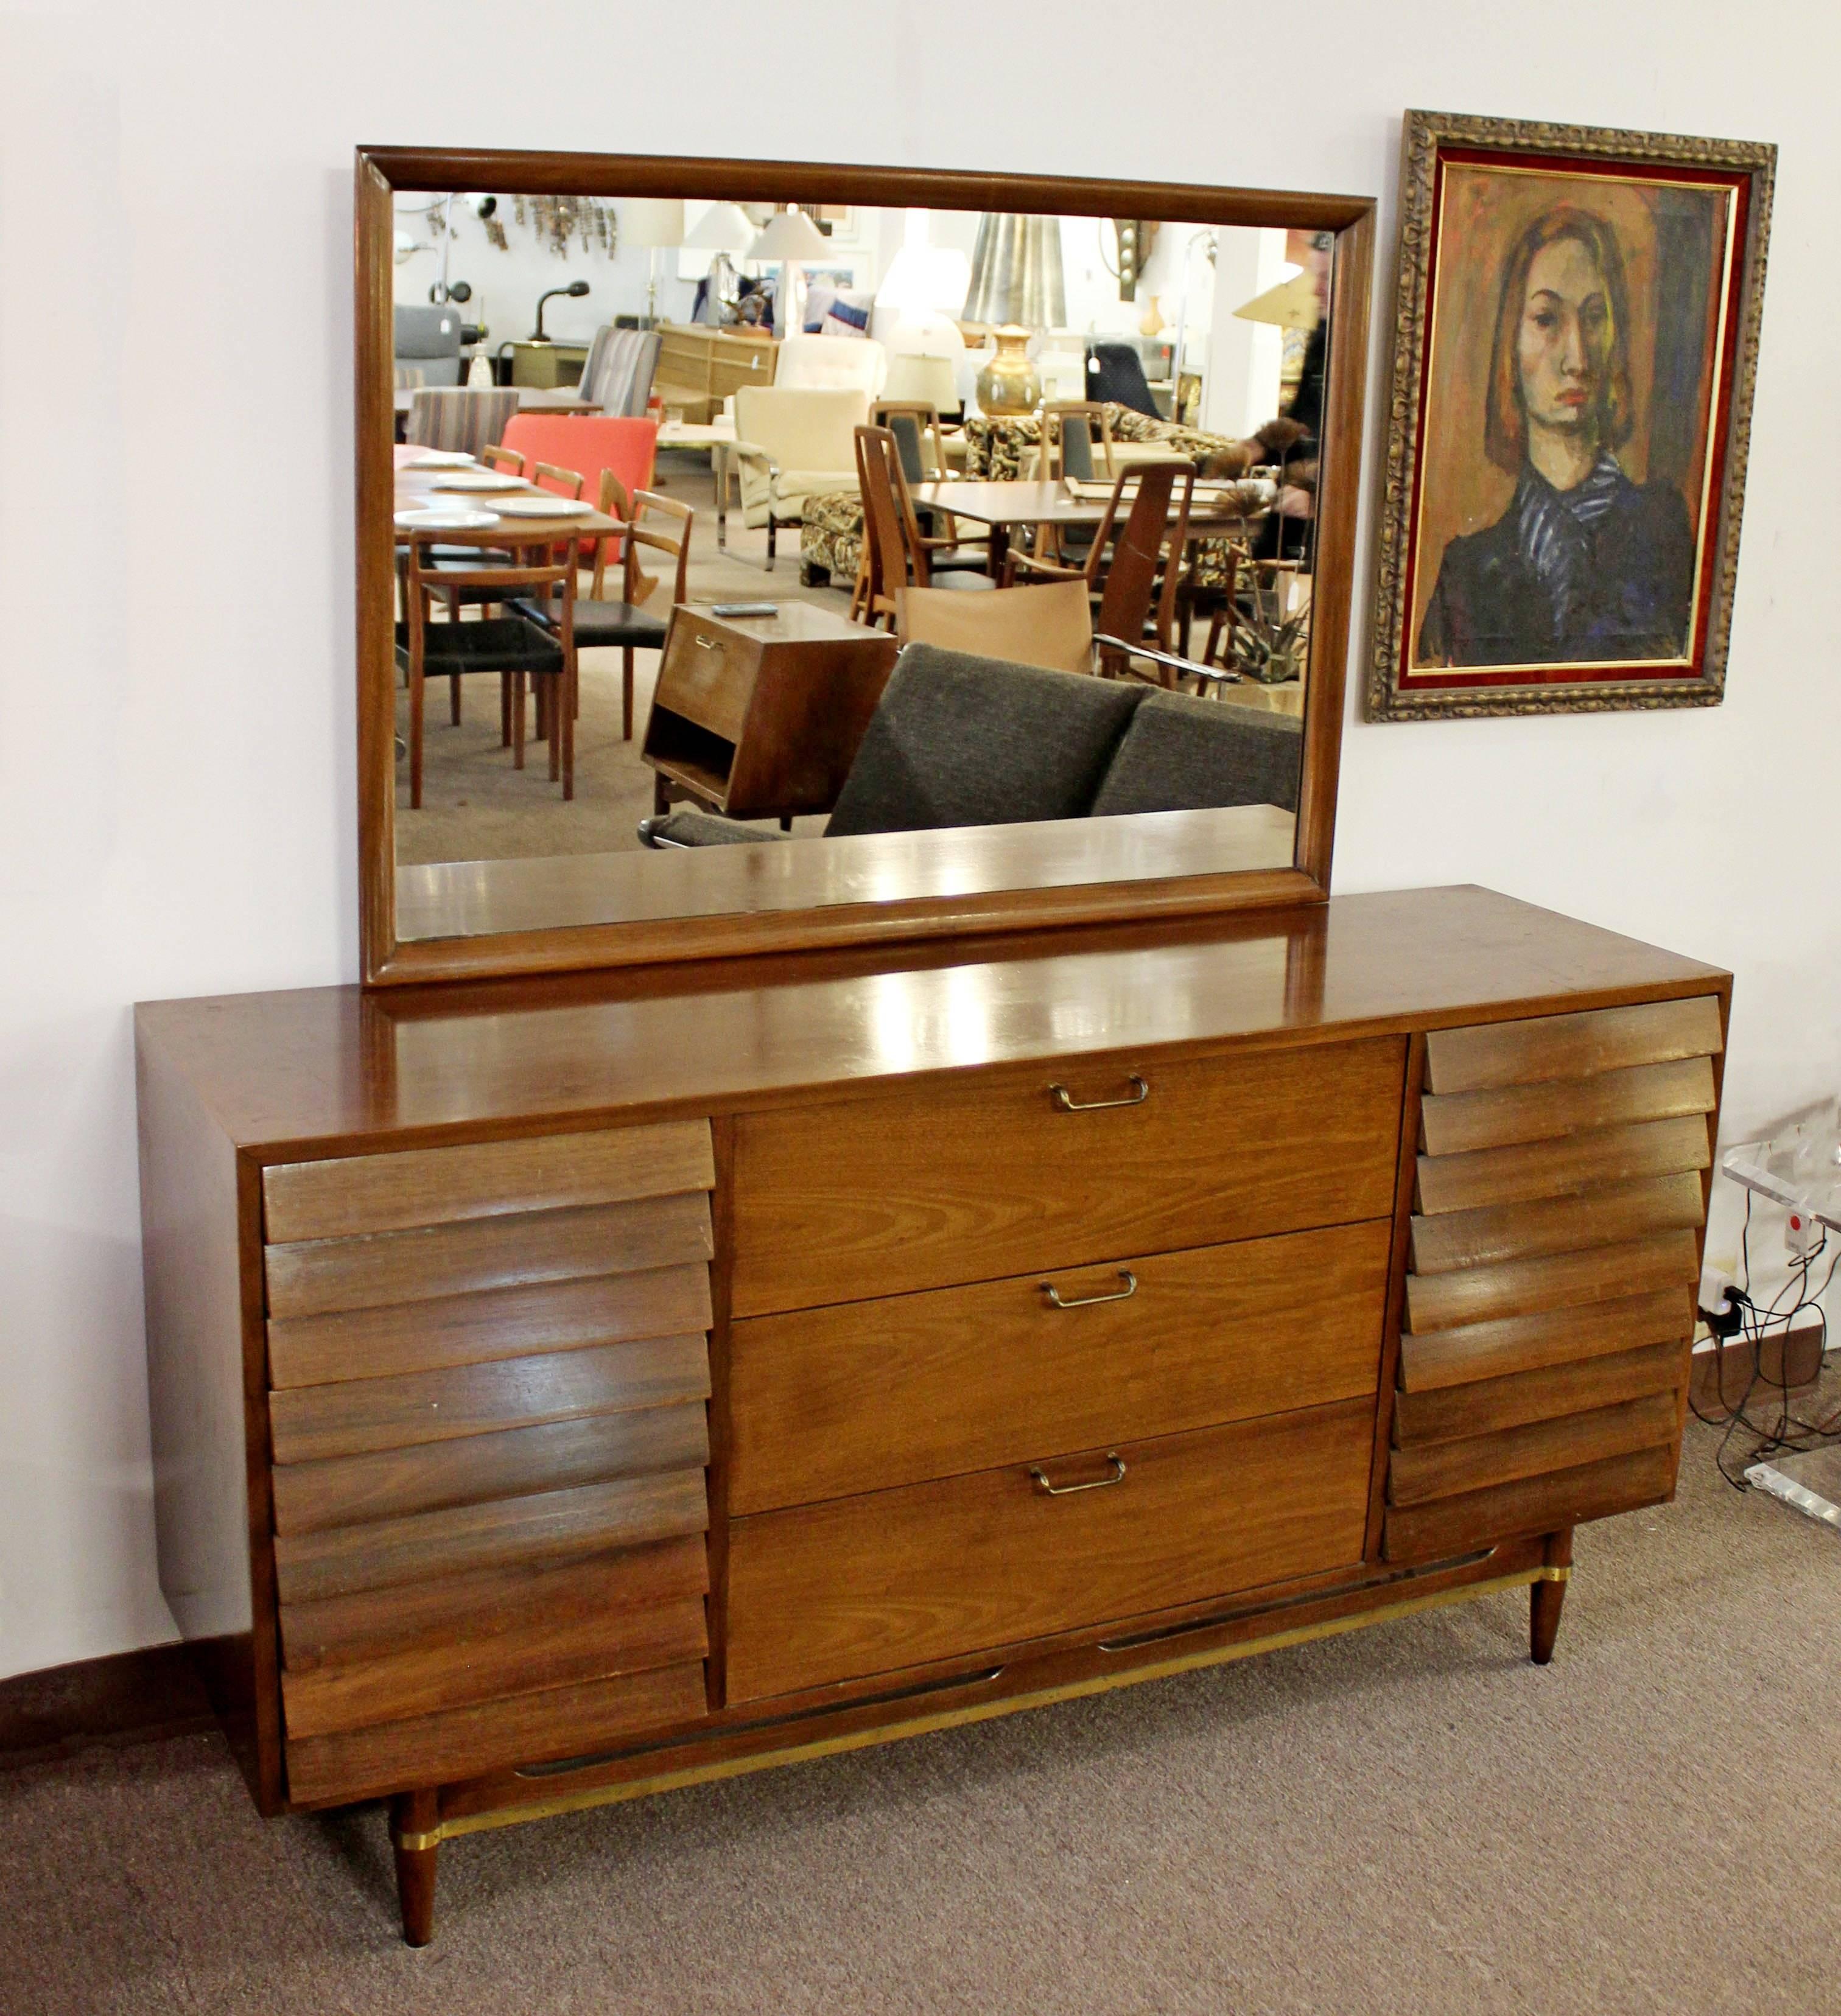 For your consideration is a stunning, walnut dresser and mirror, designed by Merton Gershun for American of Martinsville, the Dania collection, circa the 1970s. The dresser has nine louvered drawers, brass trim and sculpted handles. In excellent